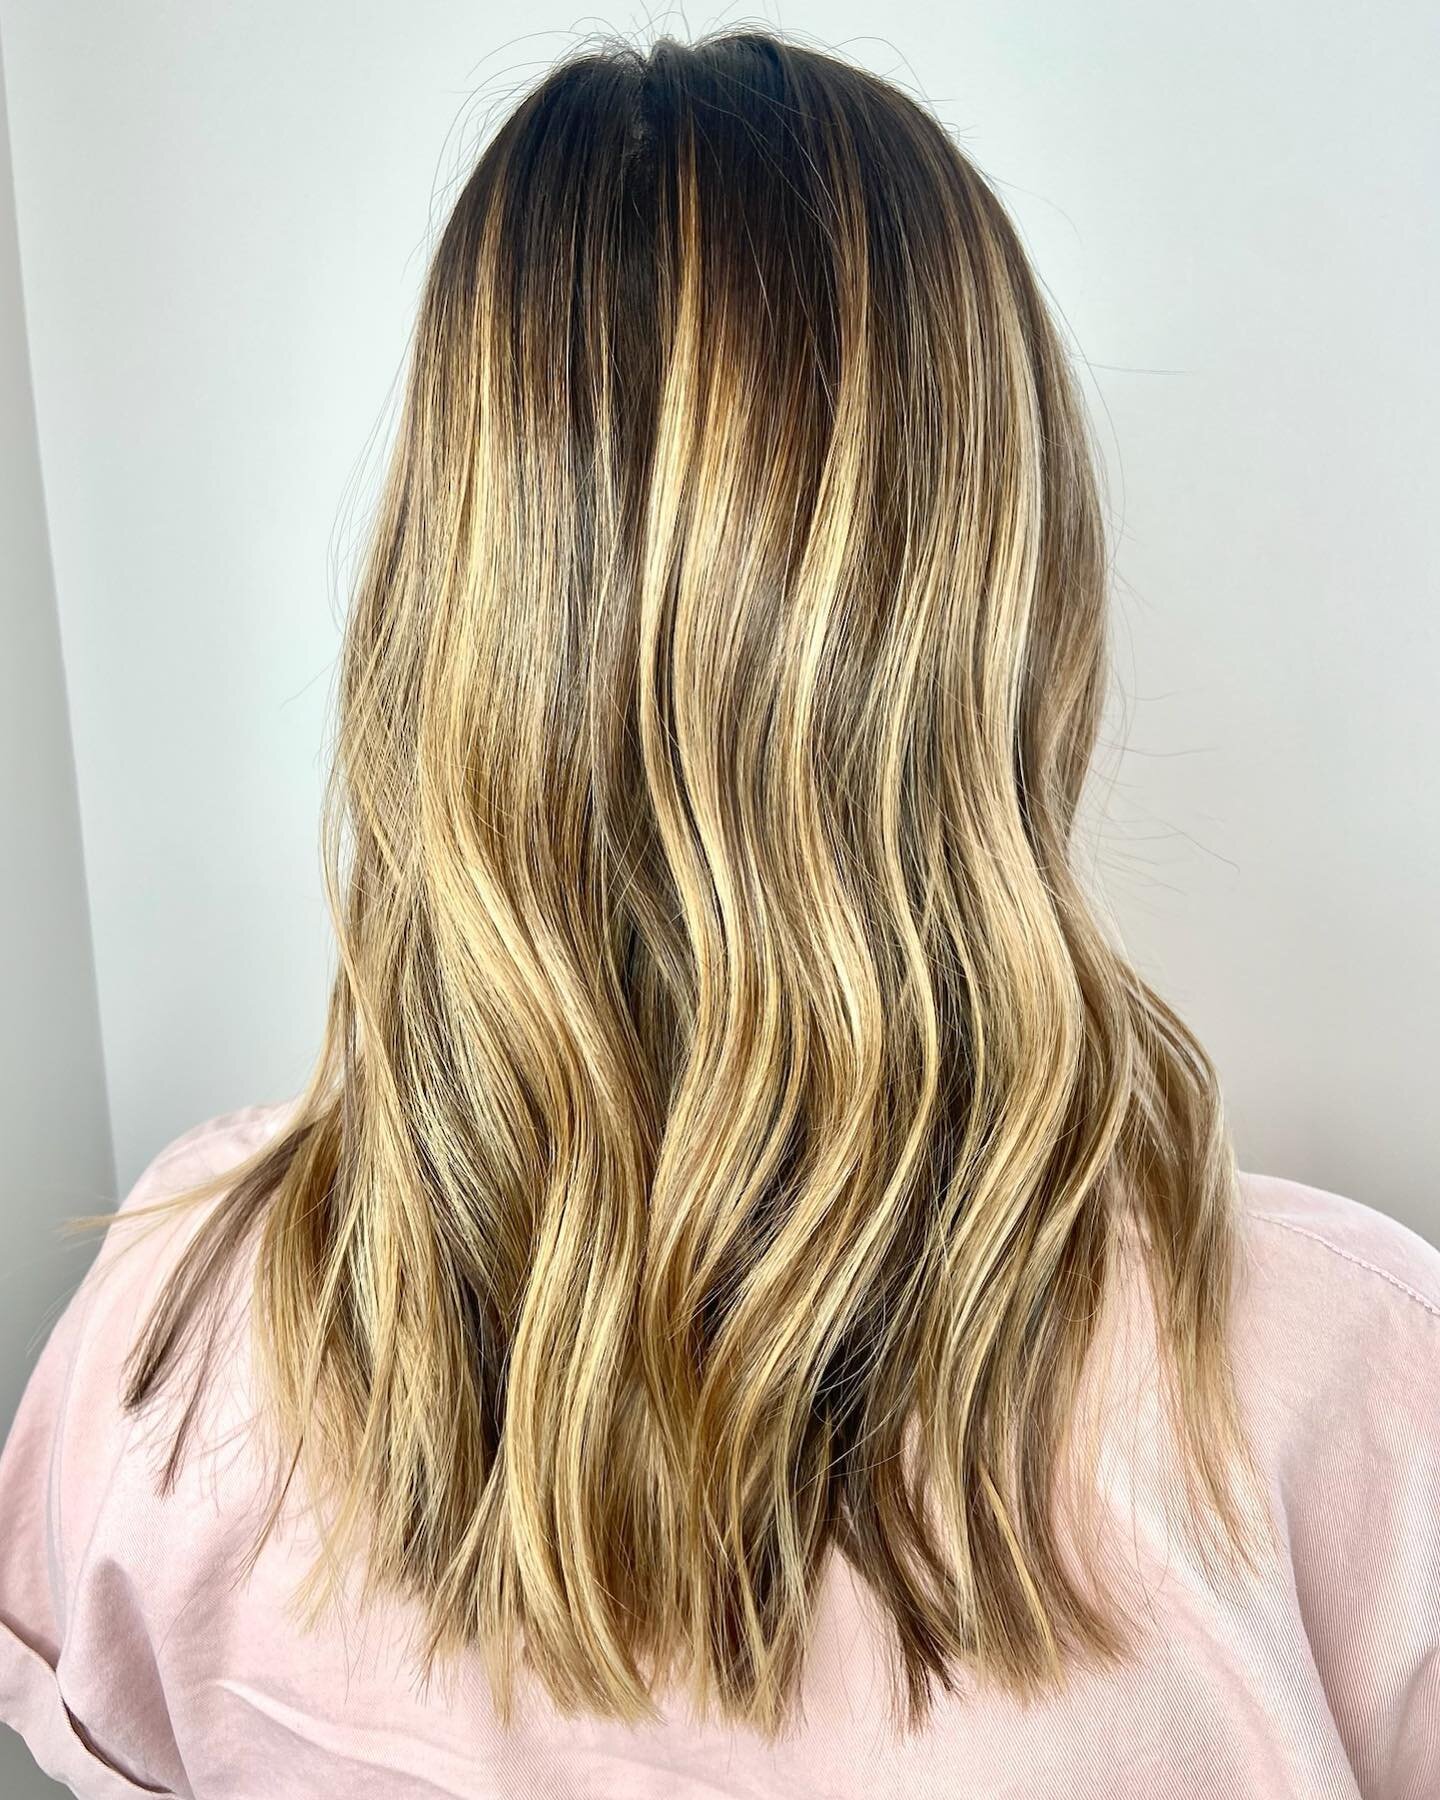 ✨ Transformation Tuesday ✨ healthy hair is beautiful hair!

🎨by @emily.artistrysalonsouth 

#hairtransformation #hairgoals #healthyhair #healthyblonde #shine #summerhair